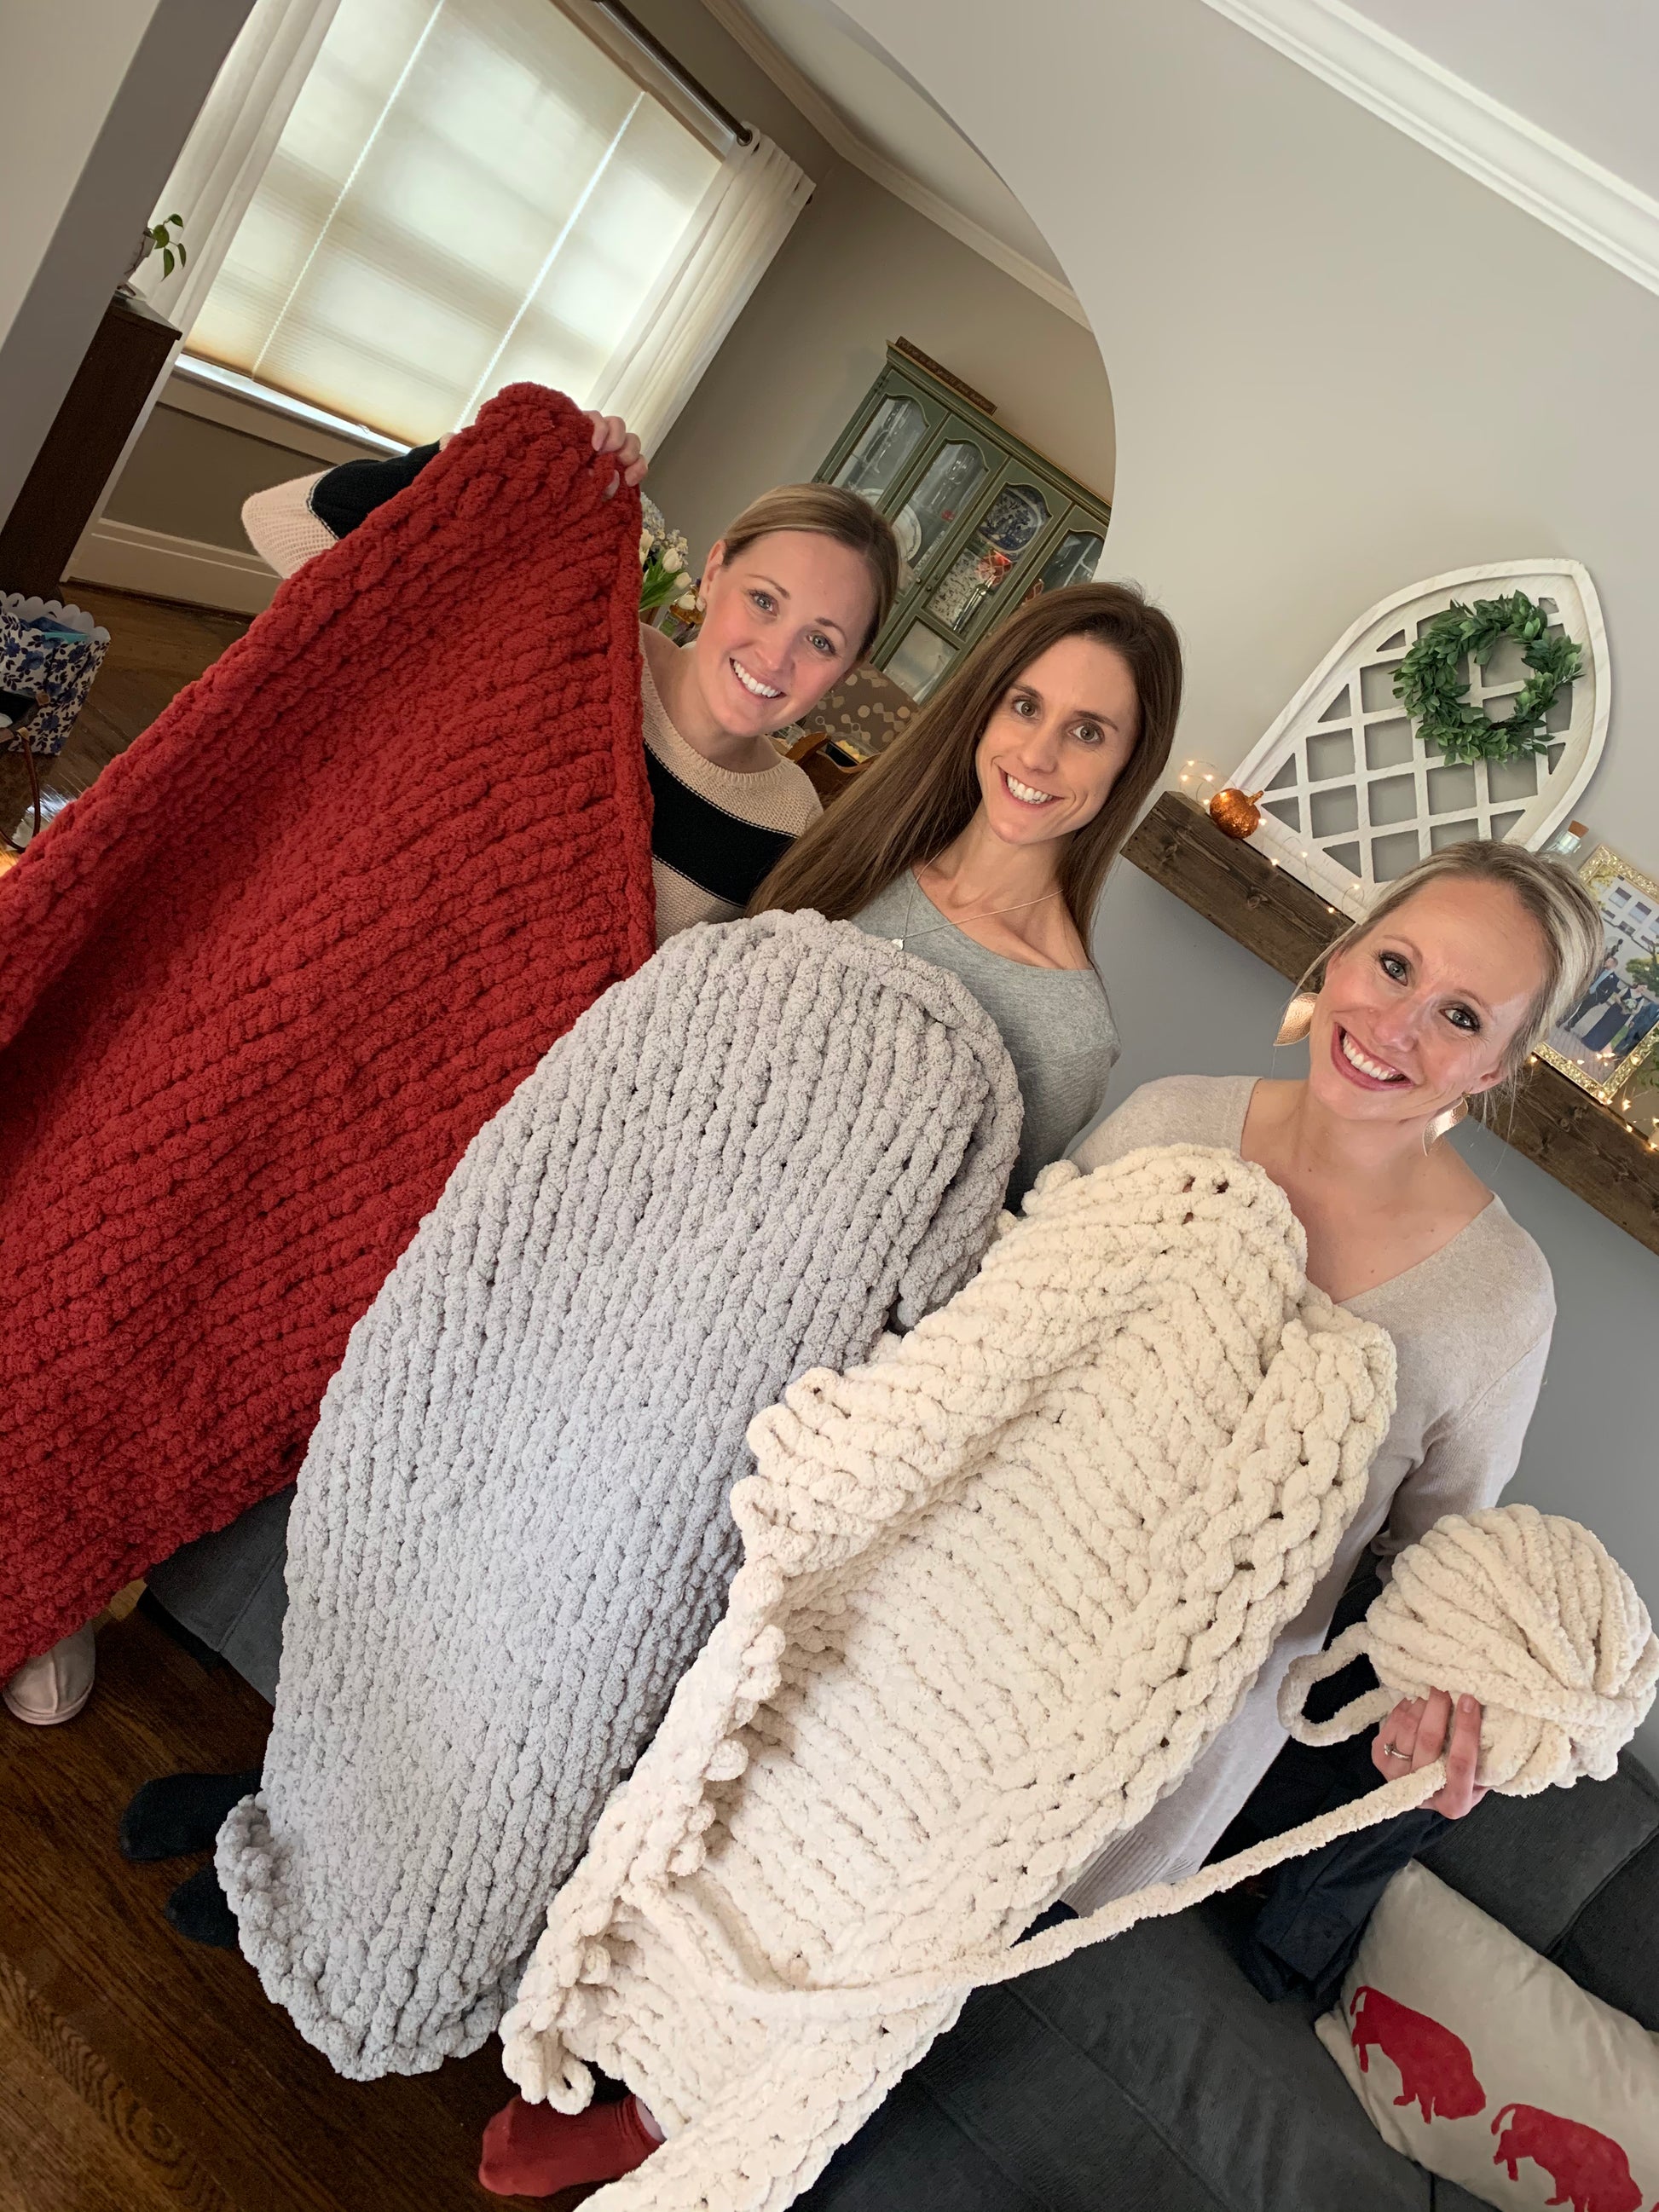 NEW* DIY-To-Go! Chunky Knit Blanket Kit! Kits are limited and only  available while supplies last. Order now, two colors have already sold out!  Chunky, By AR Workshop Rochester